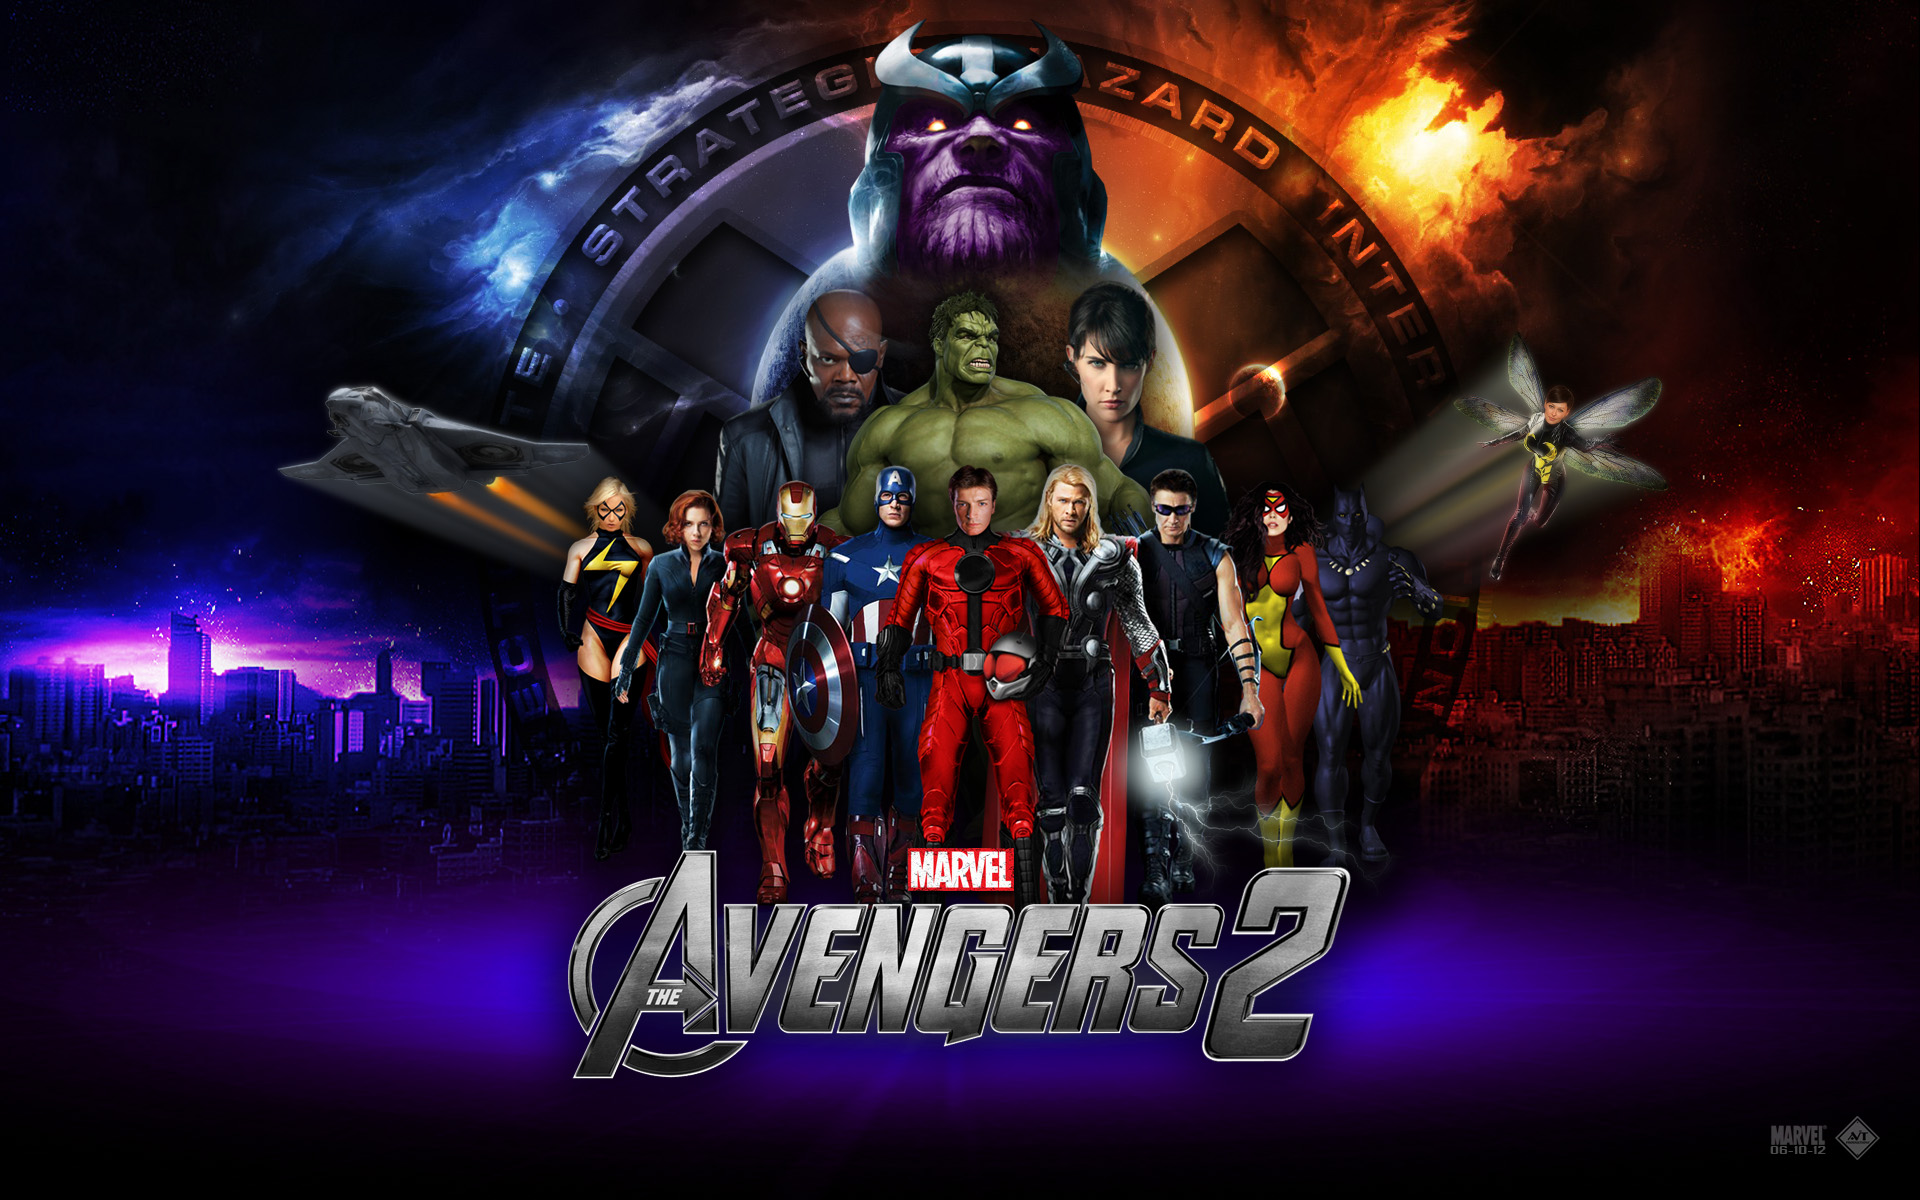 Avengers Hollywood Best Movie Hd Wallpapers All Hd - New Avengers Wallpaper  Hd - 1920x1200 Wallpaper 